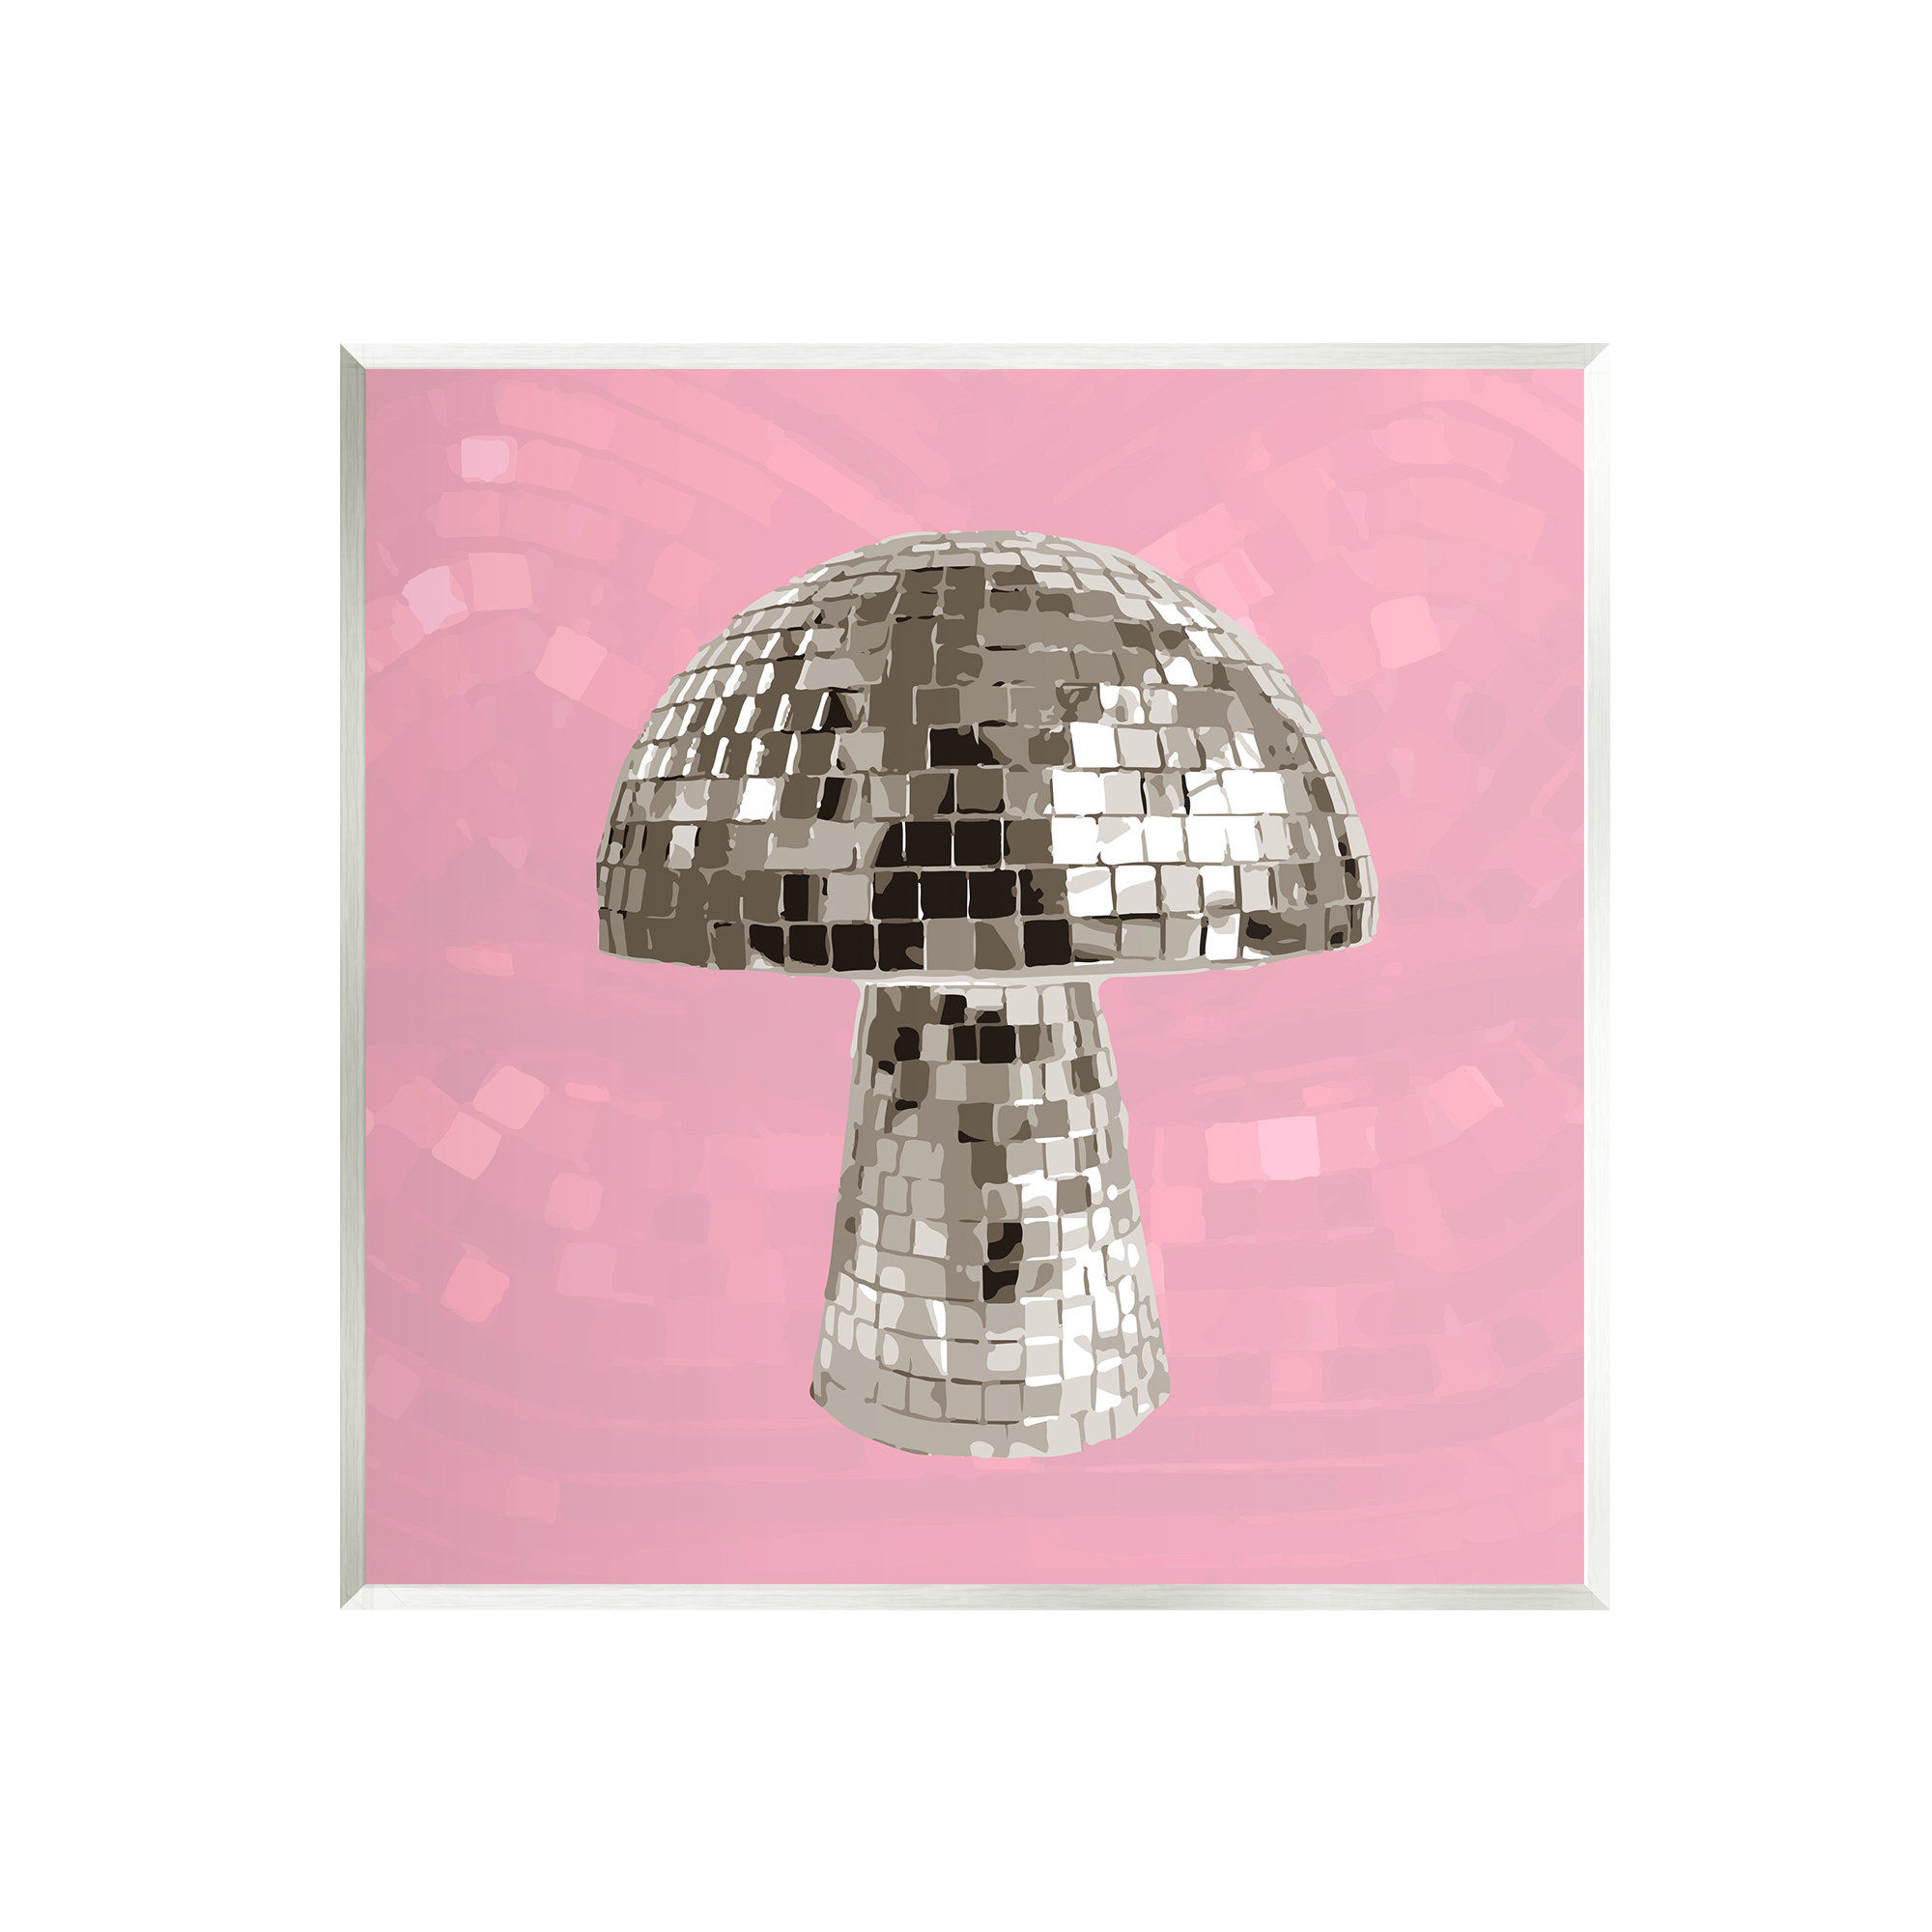 Stupell Industries Dazzling Pink Disco Ball Shining On Wood by Hey